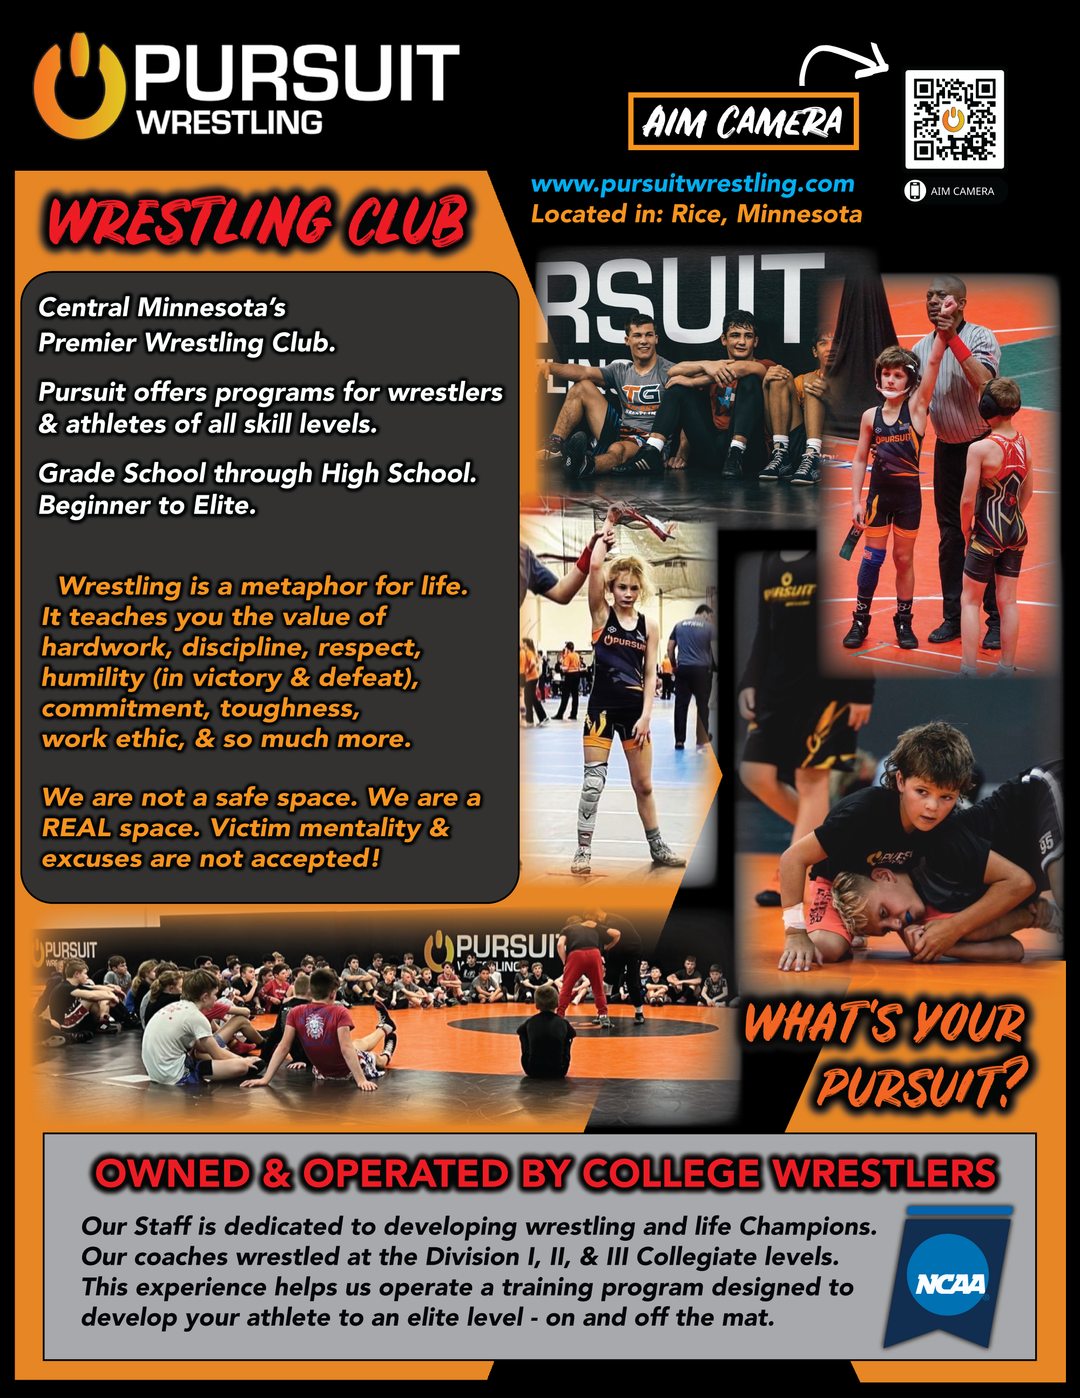 Join Wrestling Club